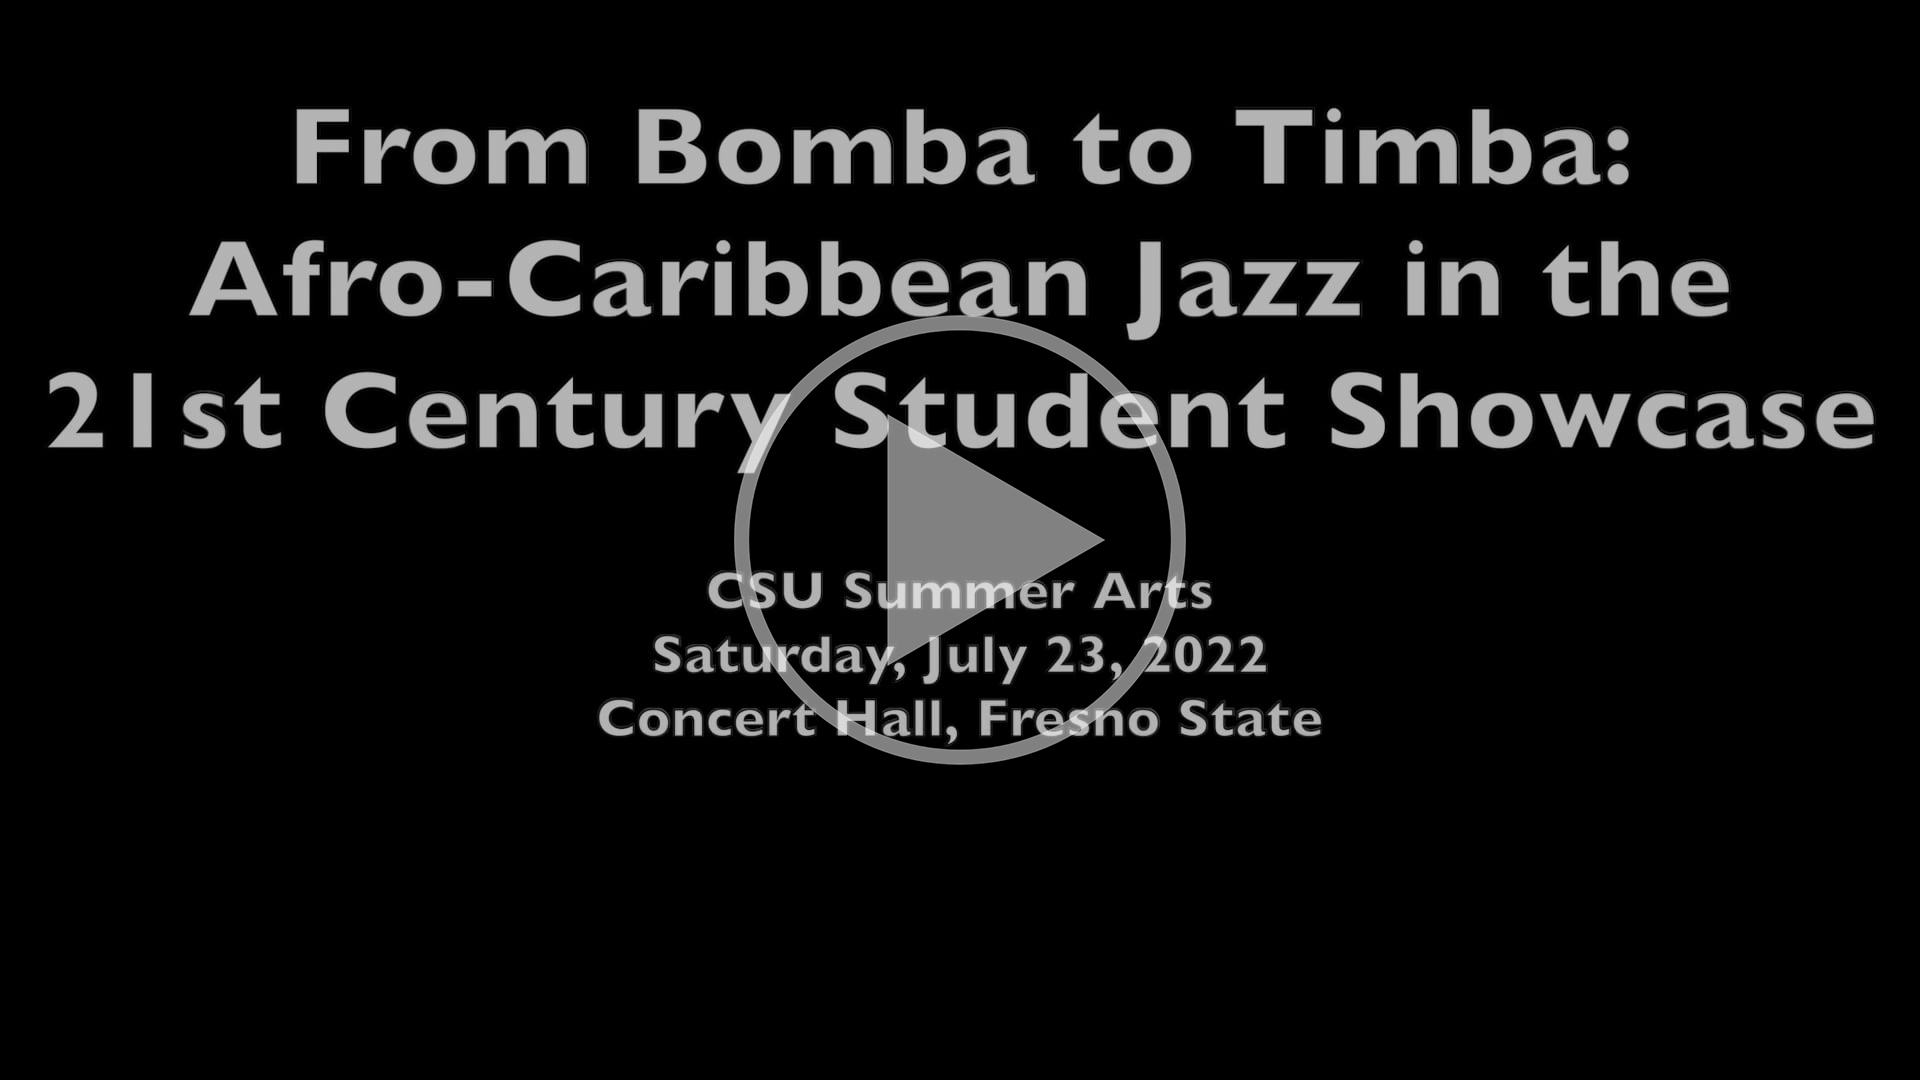 Play the 'From Bomba to Timba: Afro-Caribbean Jazz in the 21st Century Student Showcase'